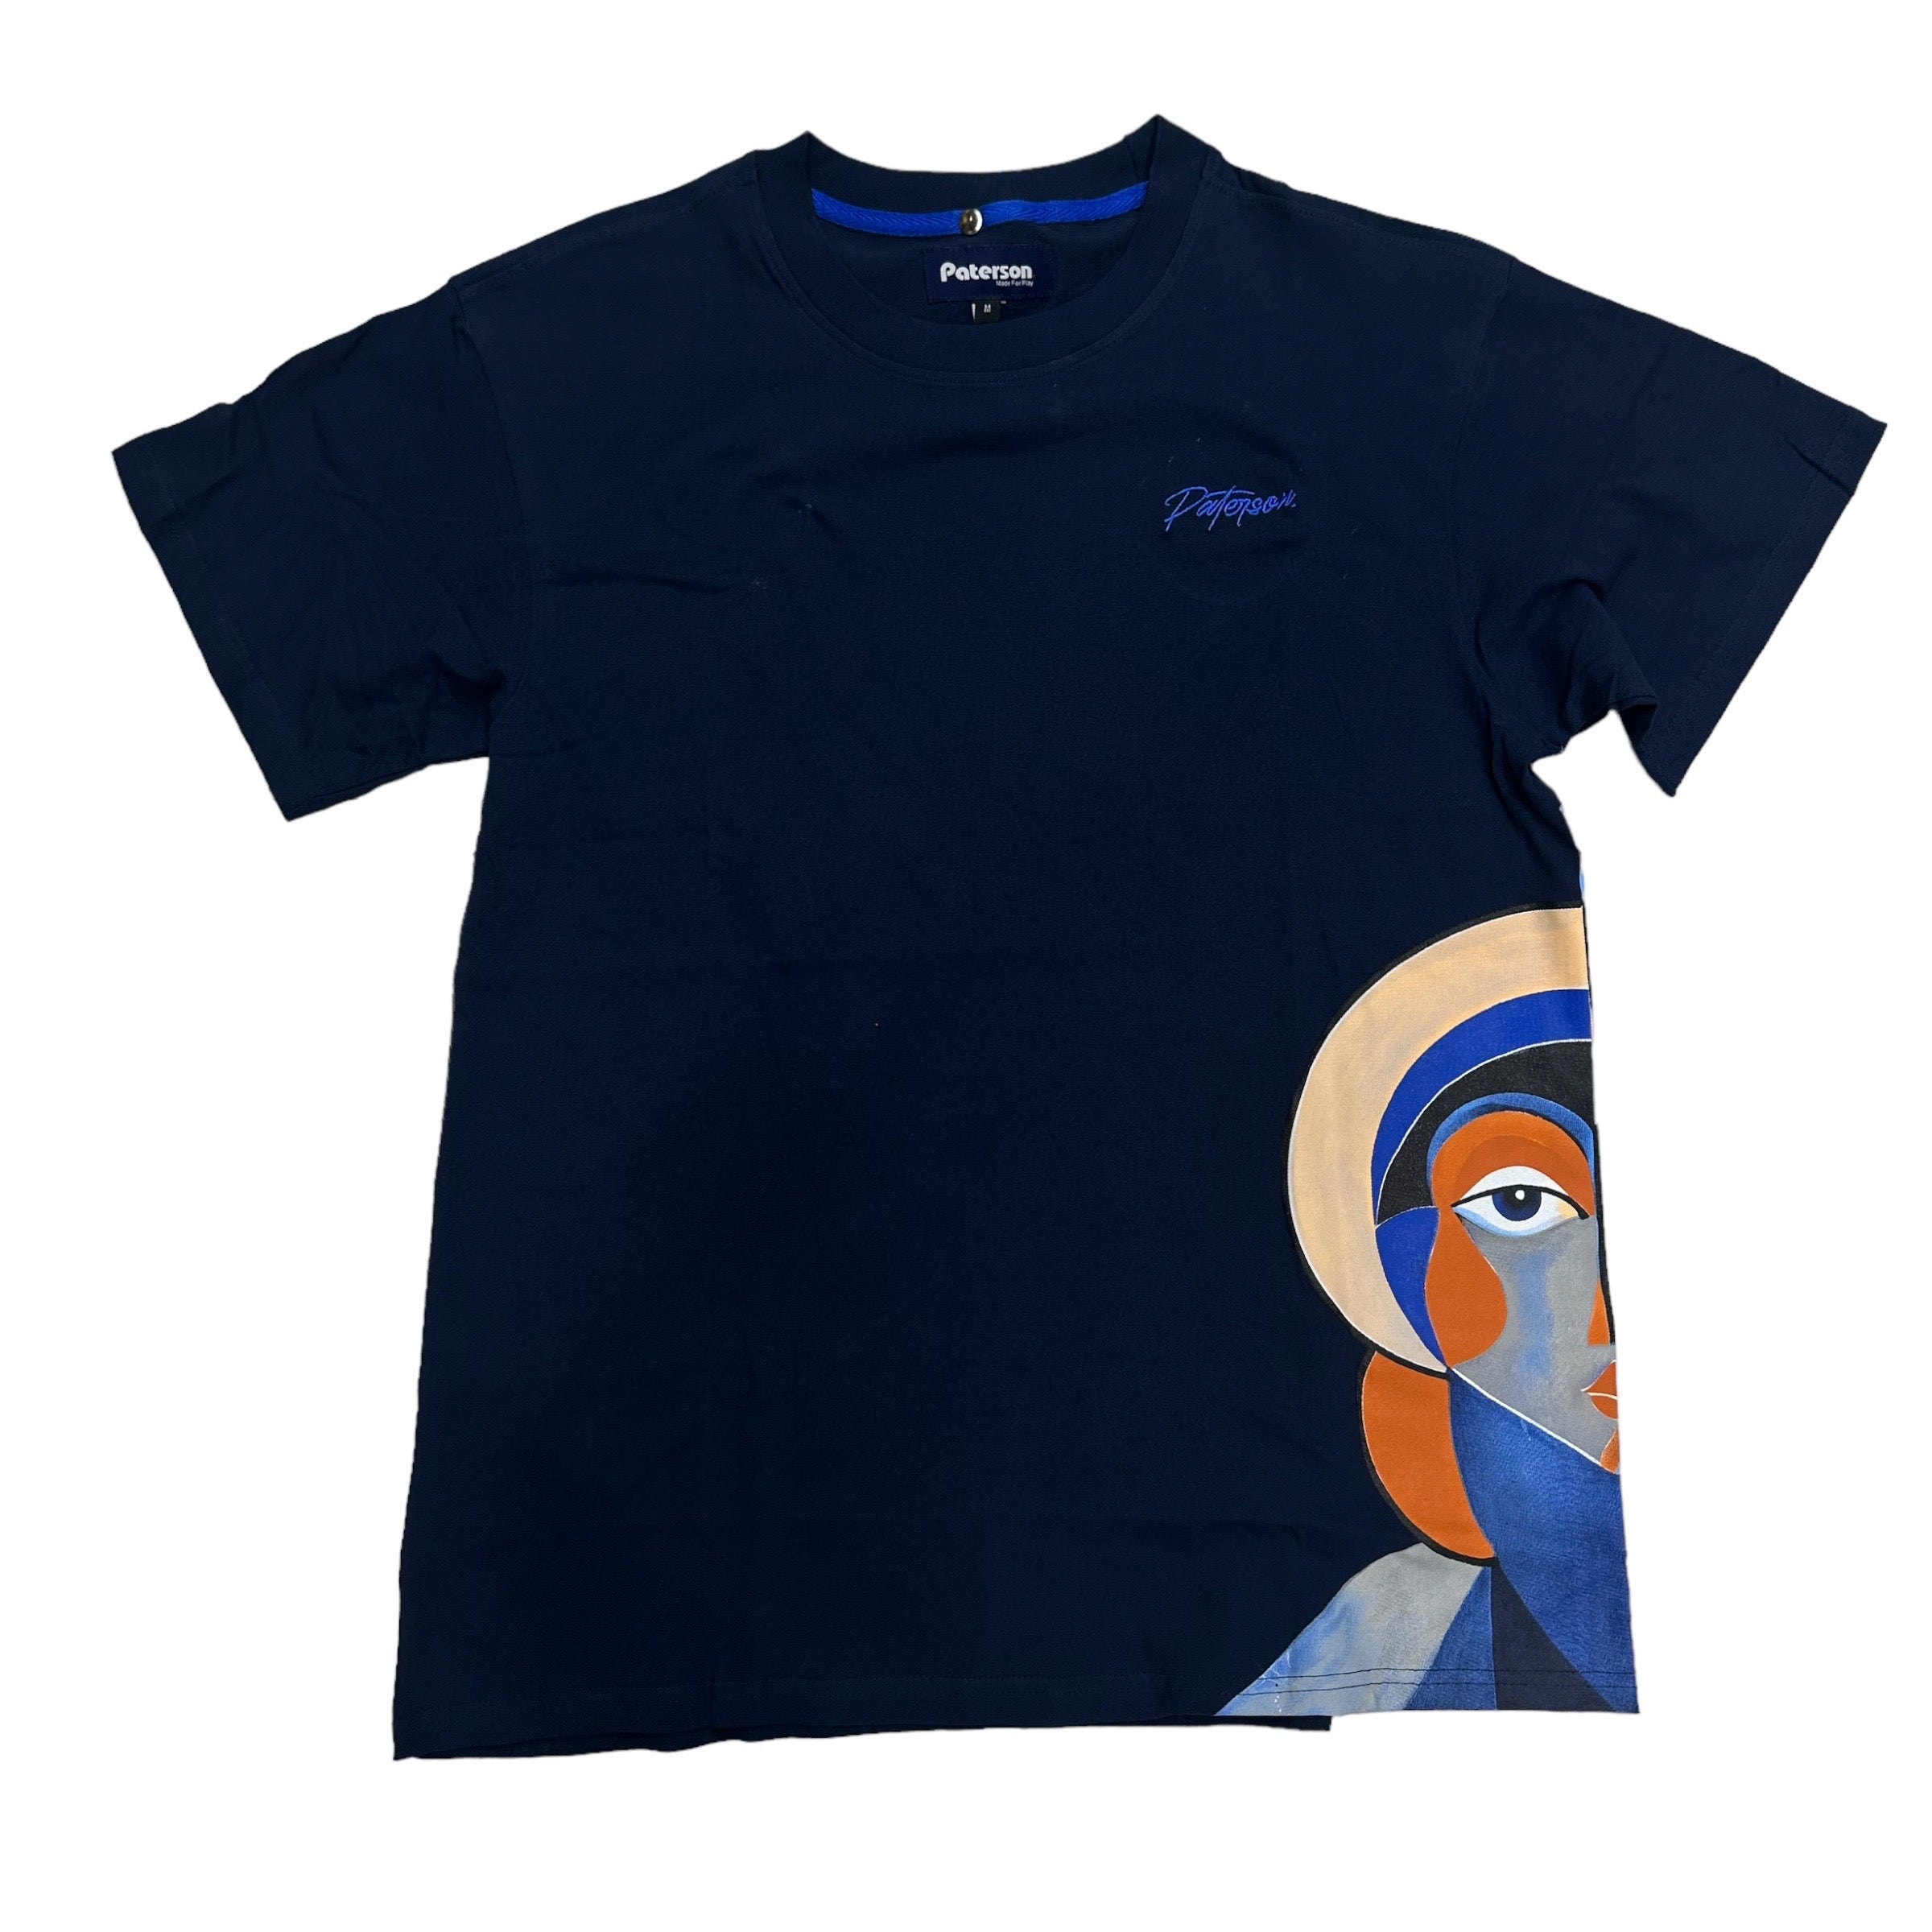 Paterson Face  t shirt Navy p54